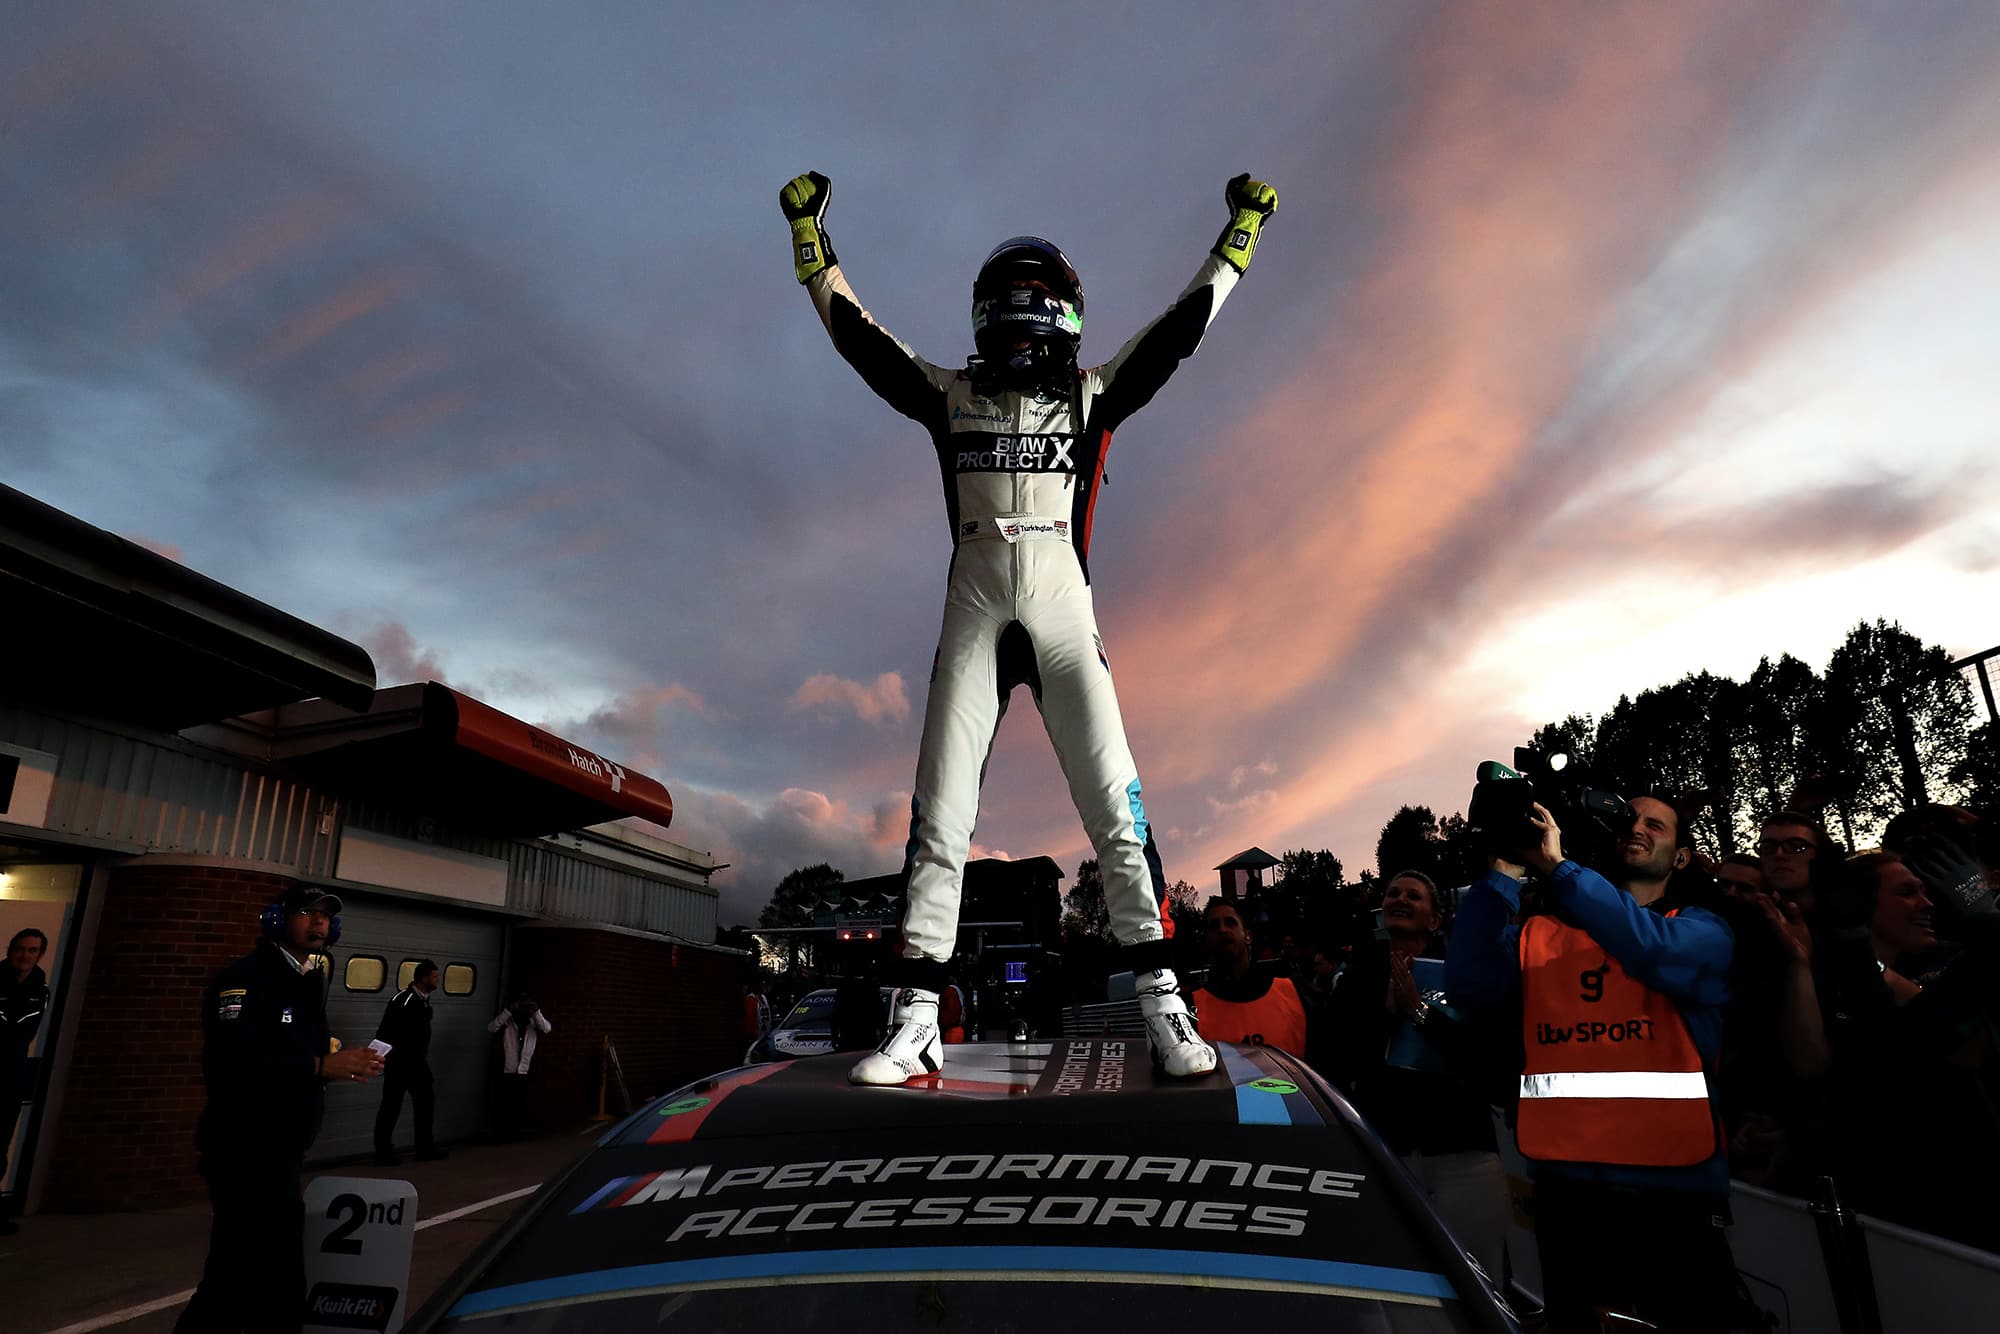 Colin Turkington stands on his car as he celebrates winning the 2019 BTCC championship at Brands Hatch